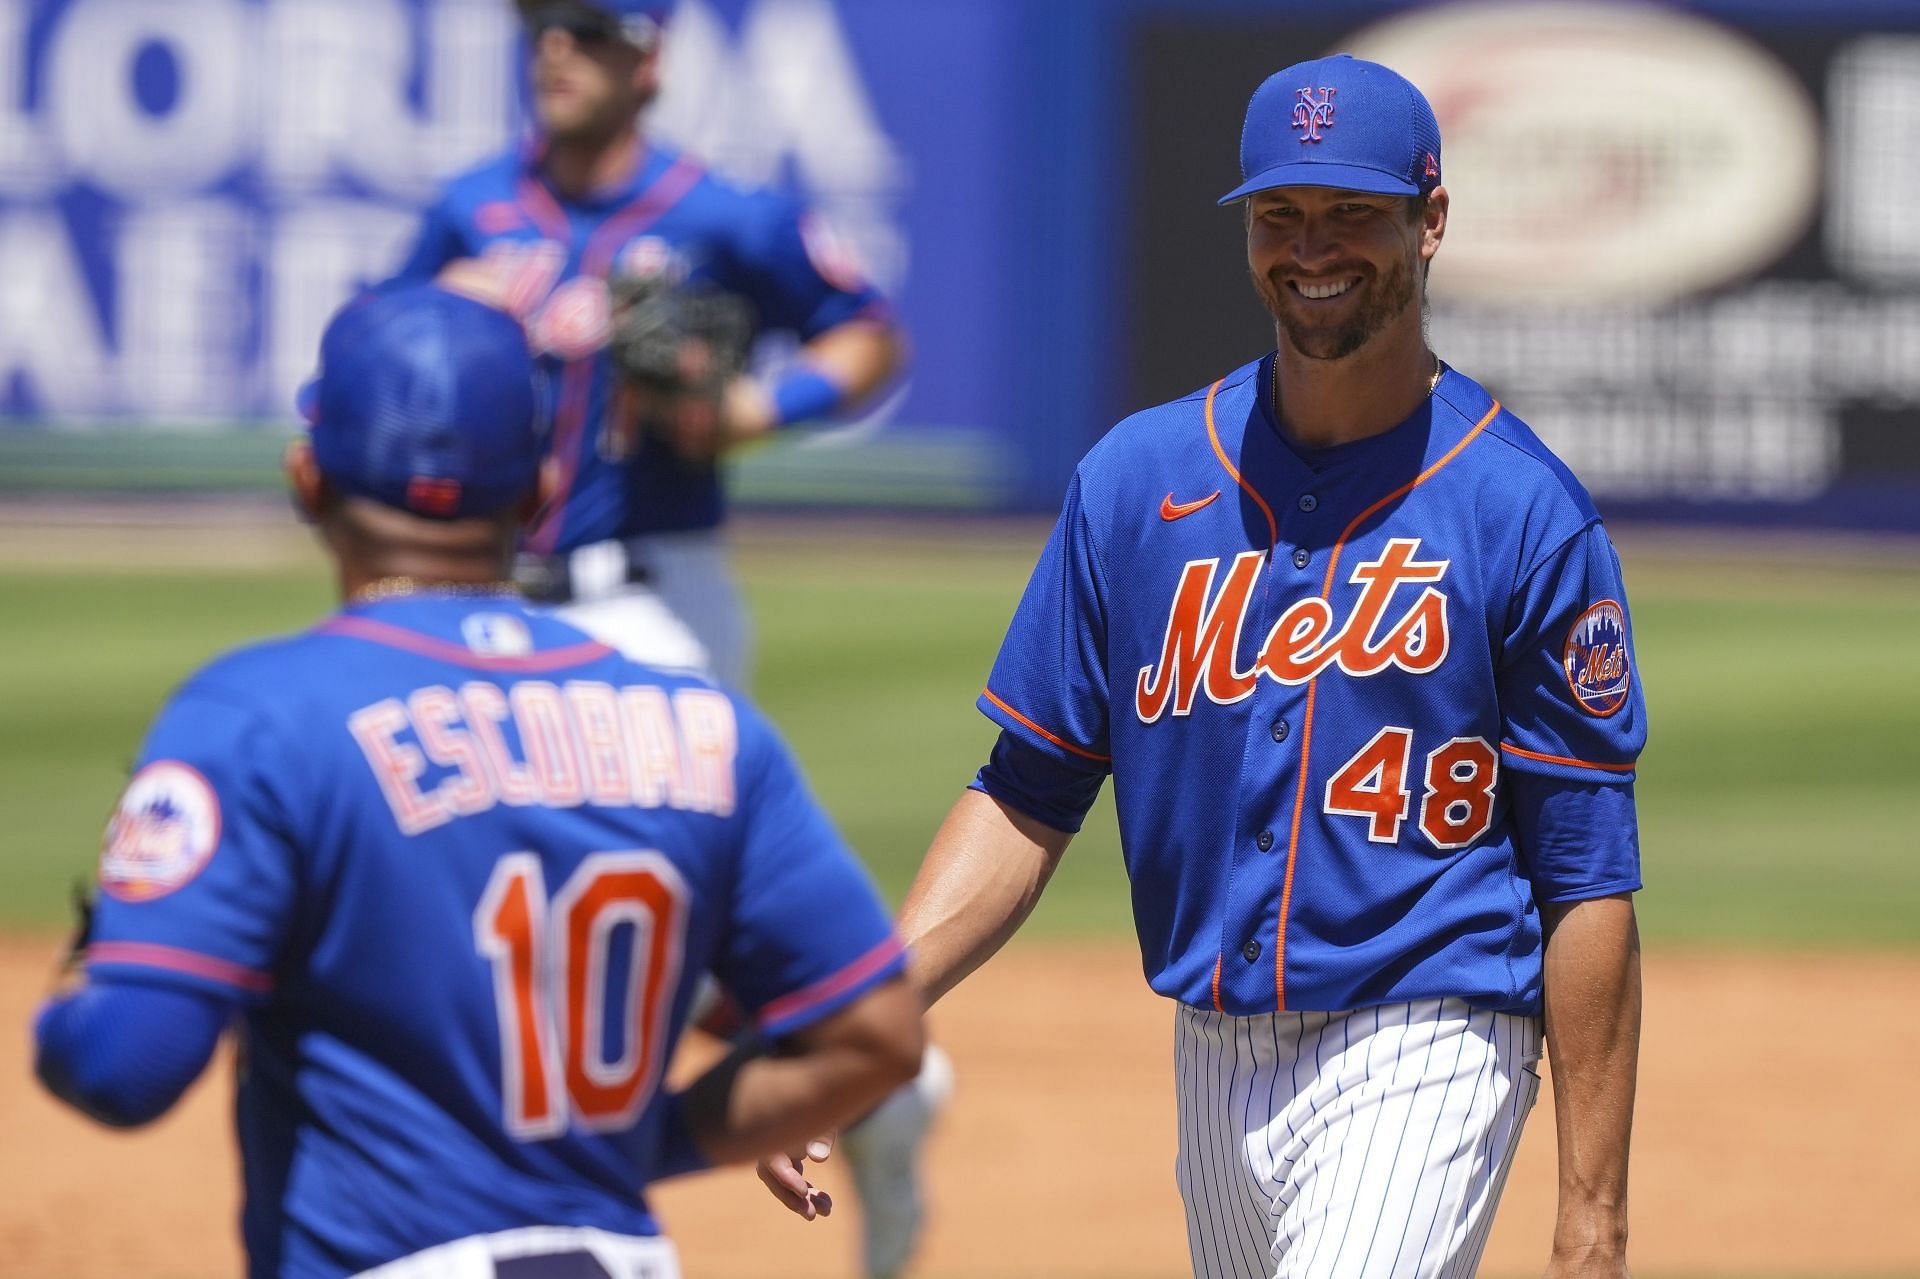 Jacob deGrom smiles as he exits the field after the third inning of the Spring Training game